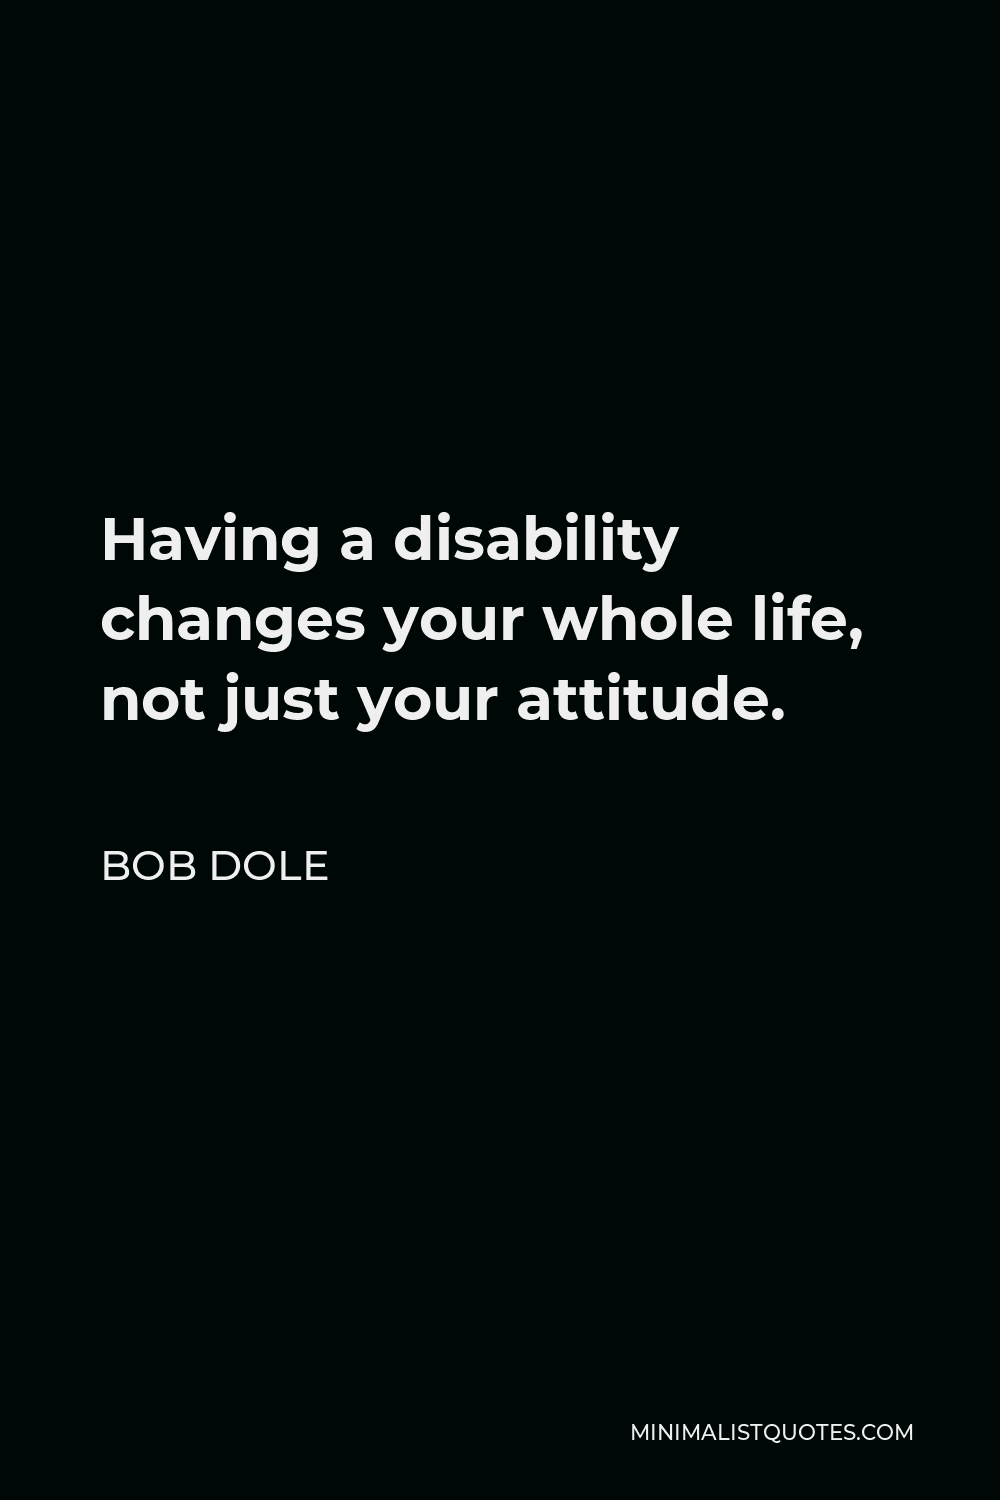 Bob Dole Quote - Having a disability changes your whole life, not just your attitude.